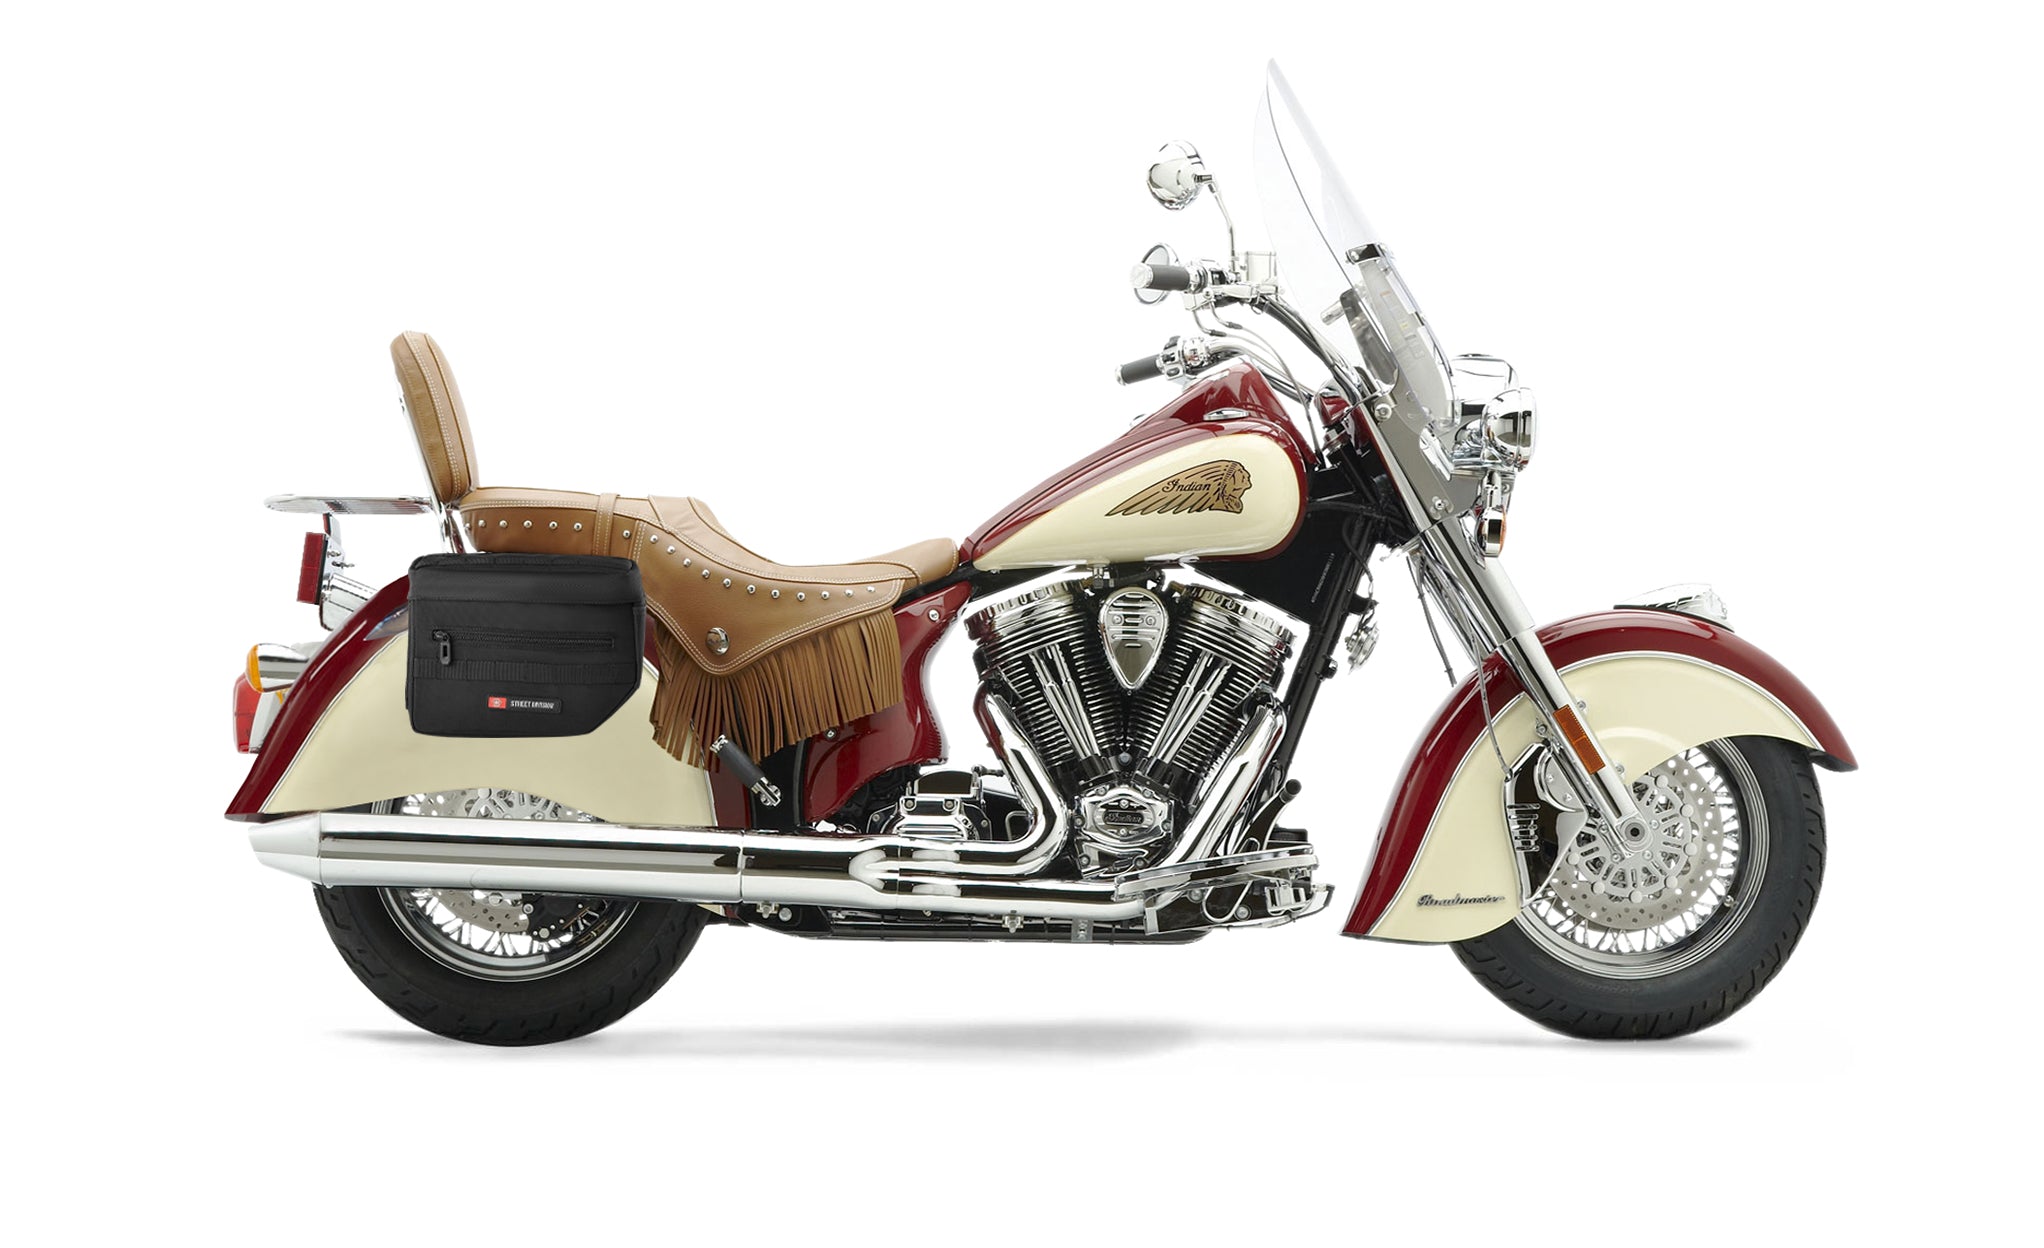 Viking Patriot Small Indian Chief Roadmaster Motorcycle Throw Over Saddlebags on Bike Photo @expand